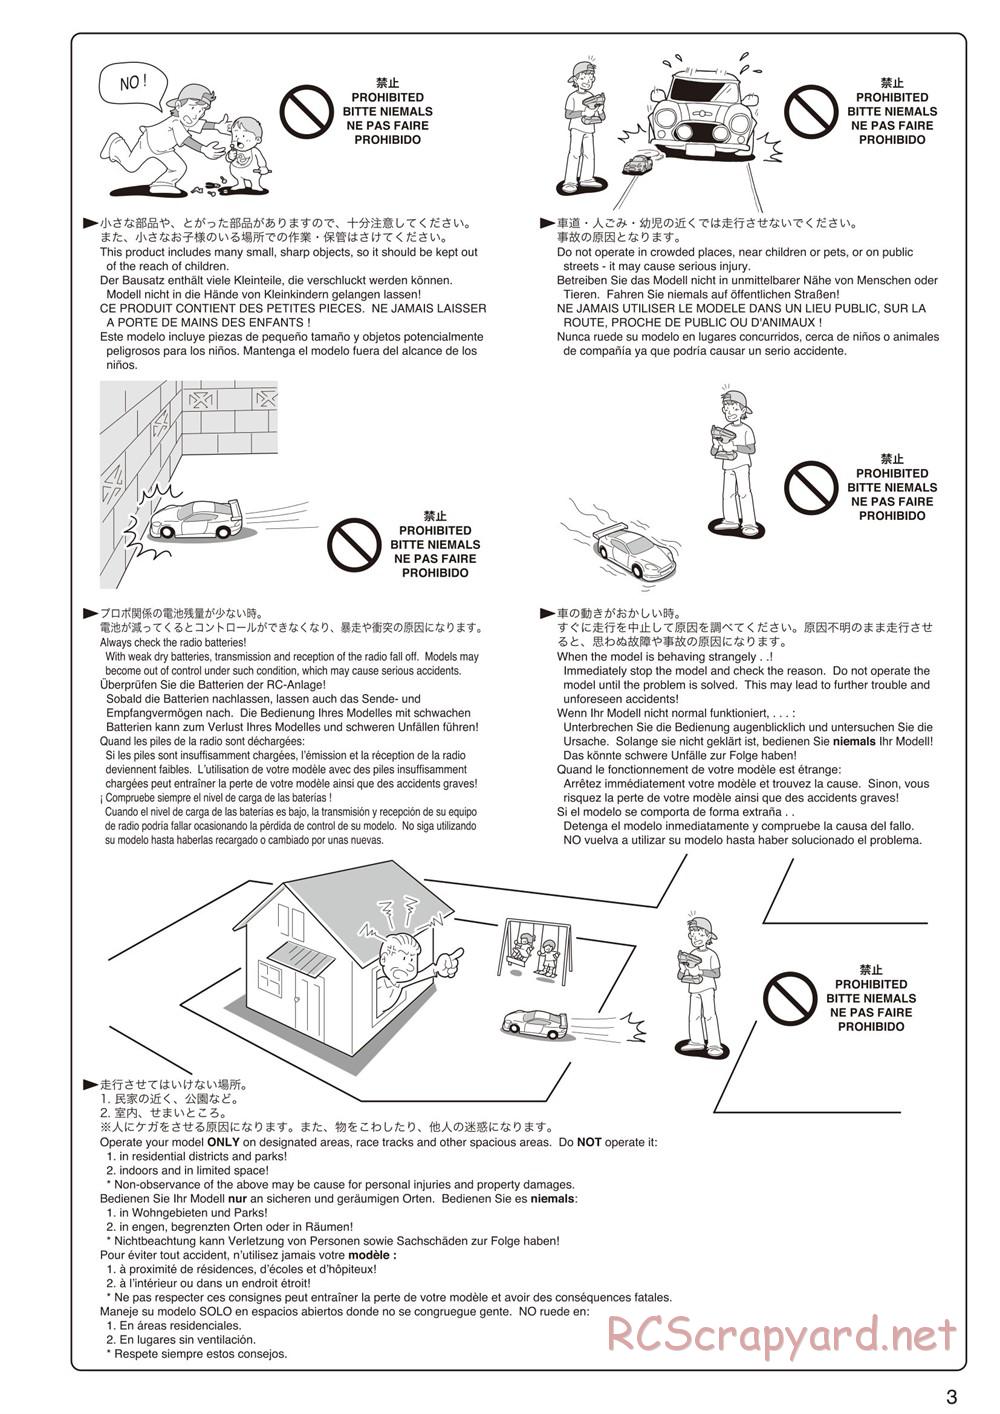 Kyosho - Axxe 2WD Desert Buggy - Manual - Page 3